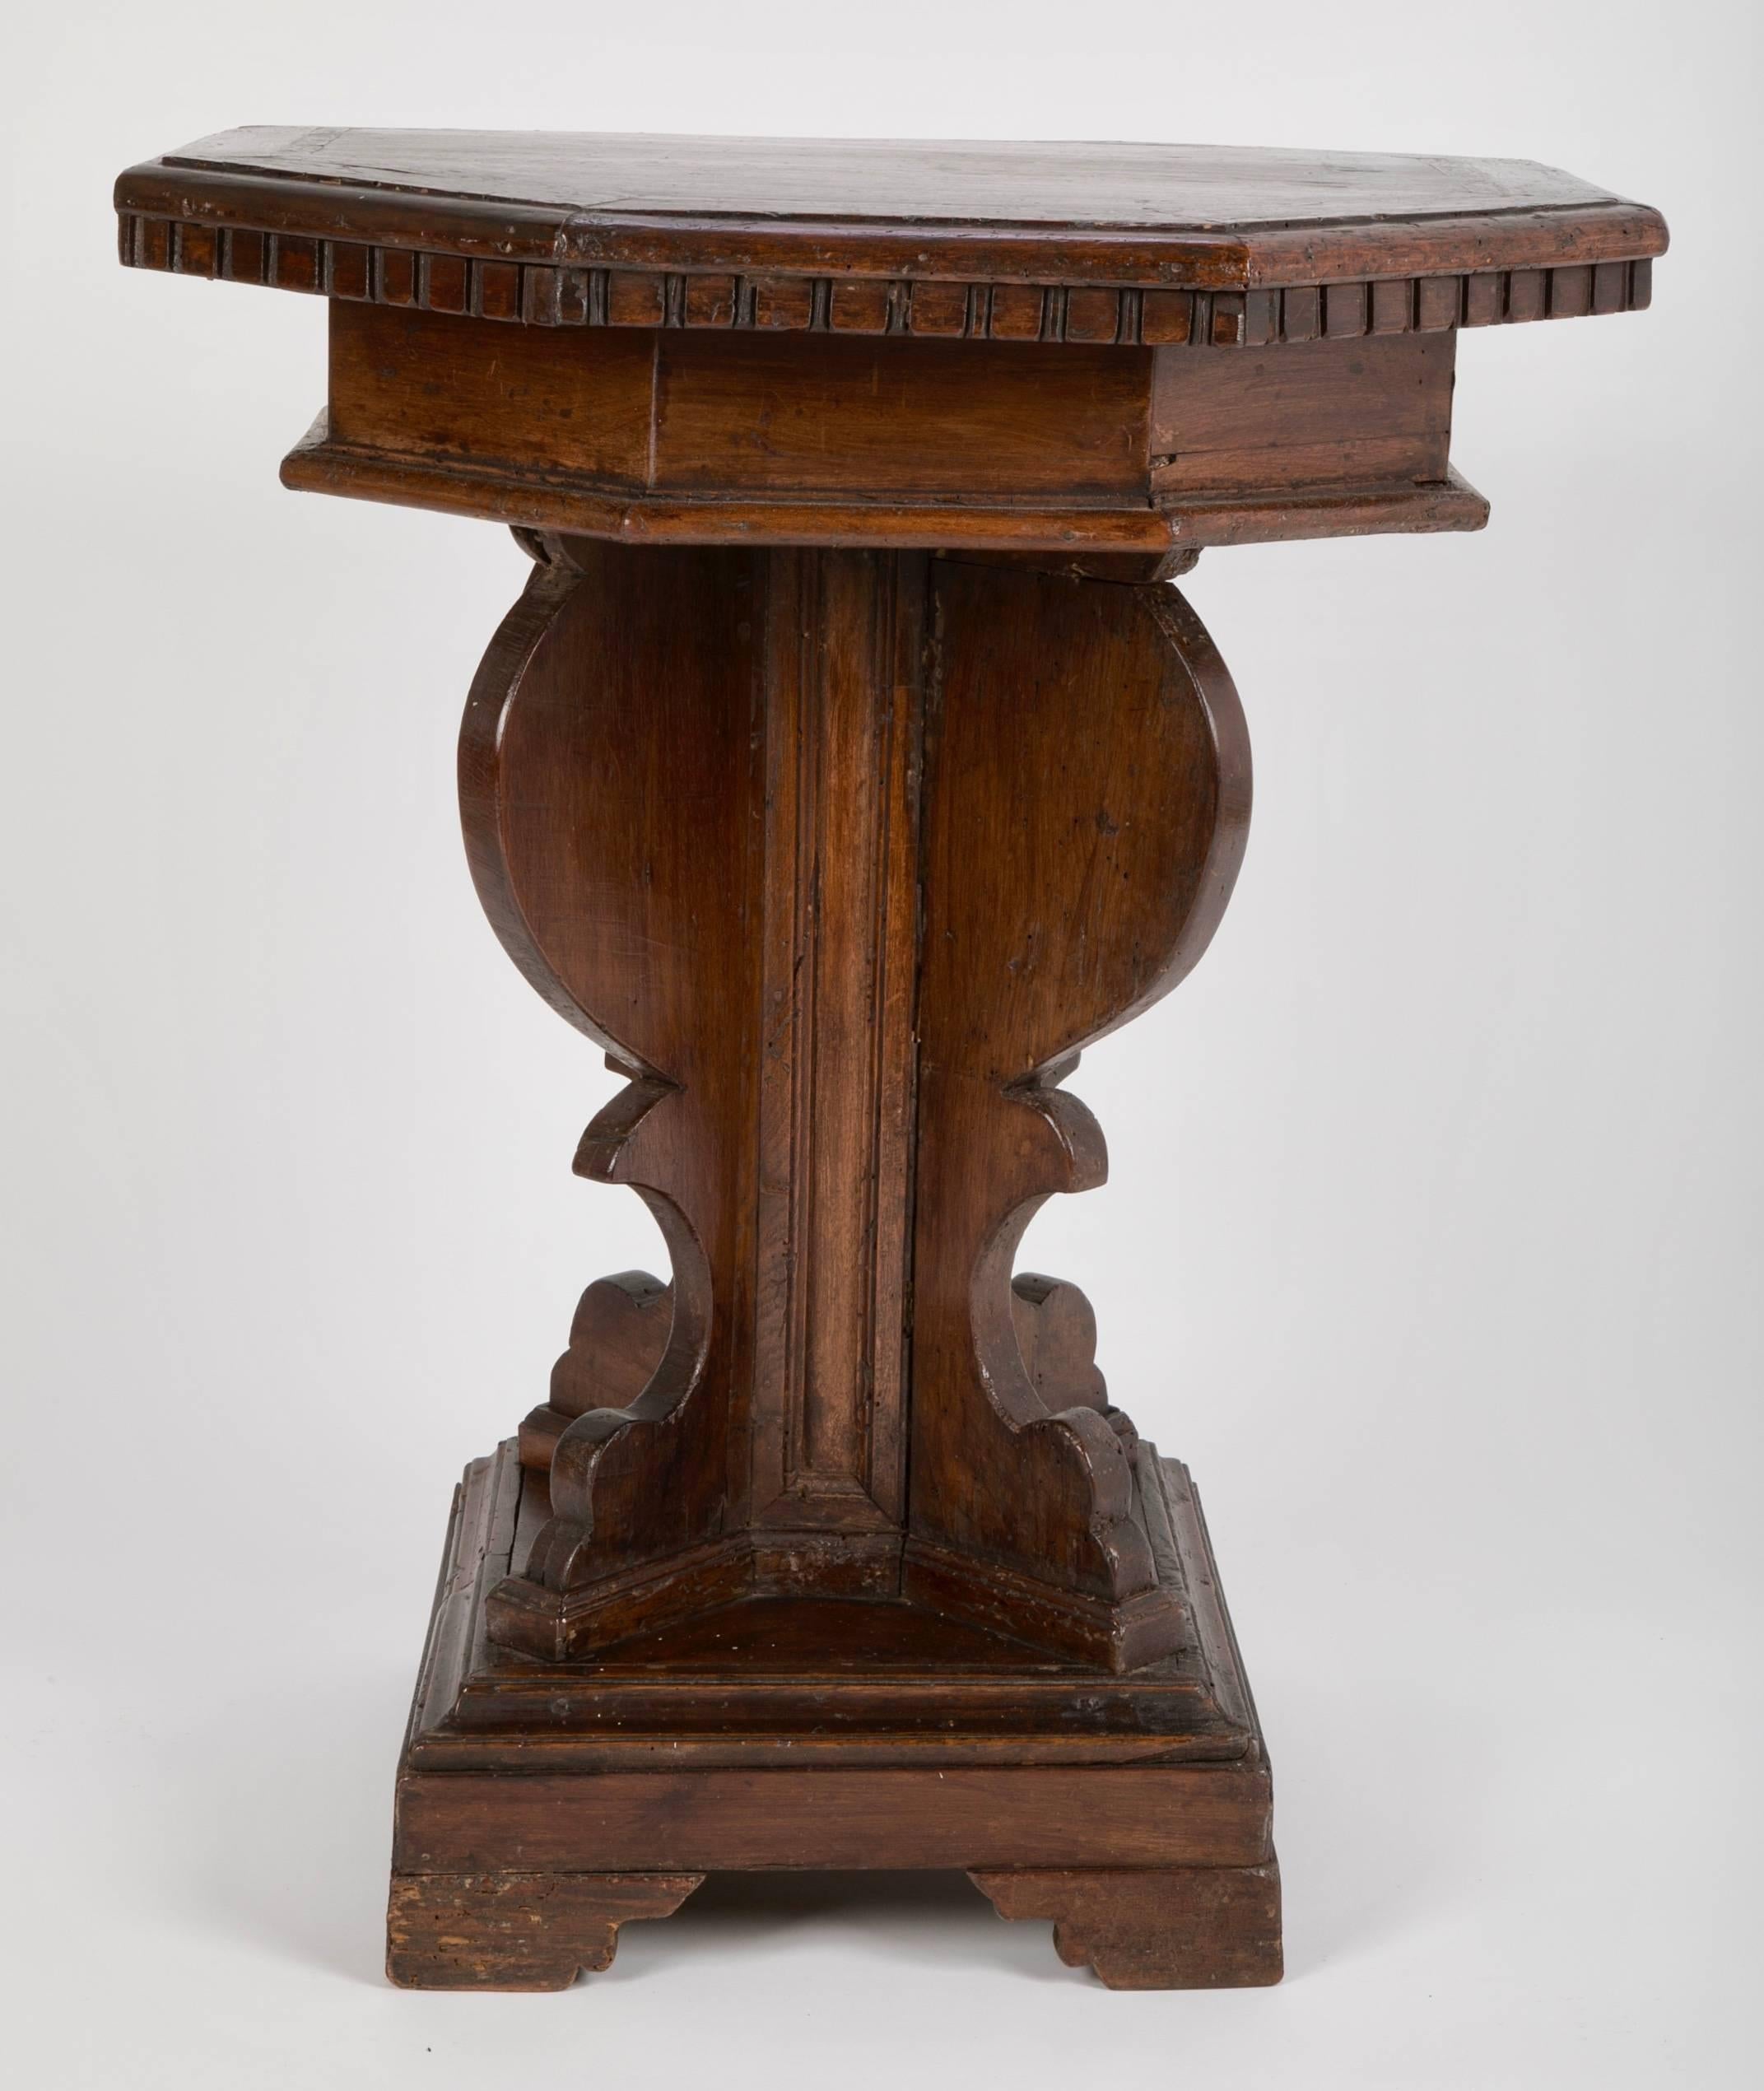 17th century Tuscan walnut octagonal side table. The top with an inlaid band of marquetry and gadrooned molding supported by a vase-form base on a square plinth with four bracket feet. A wonderful example from the Italian Baroque period. The